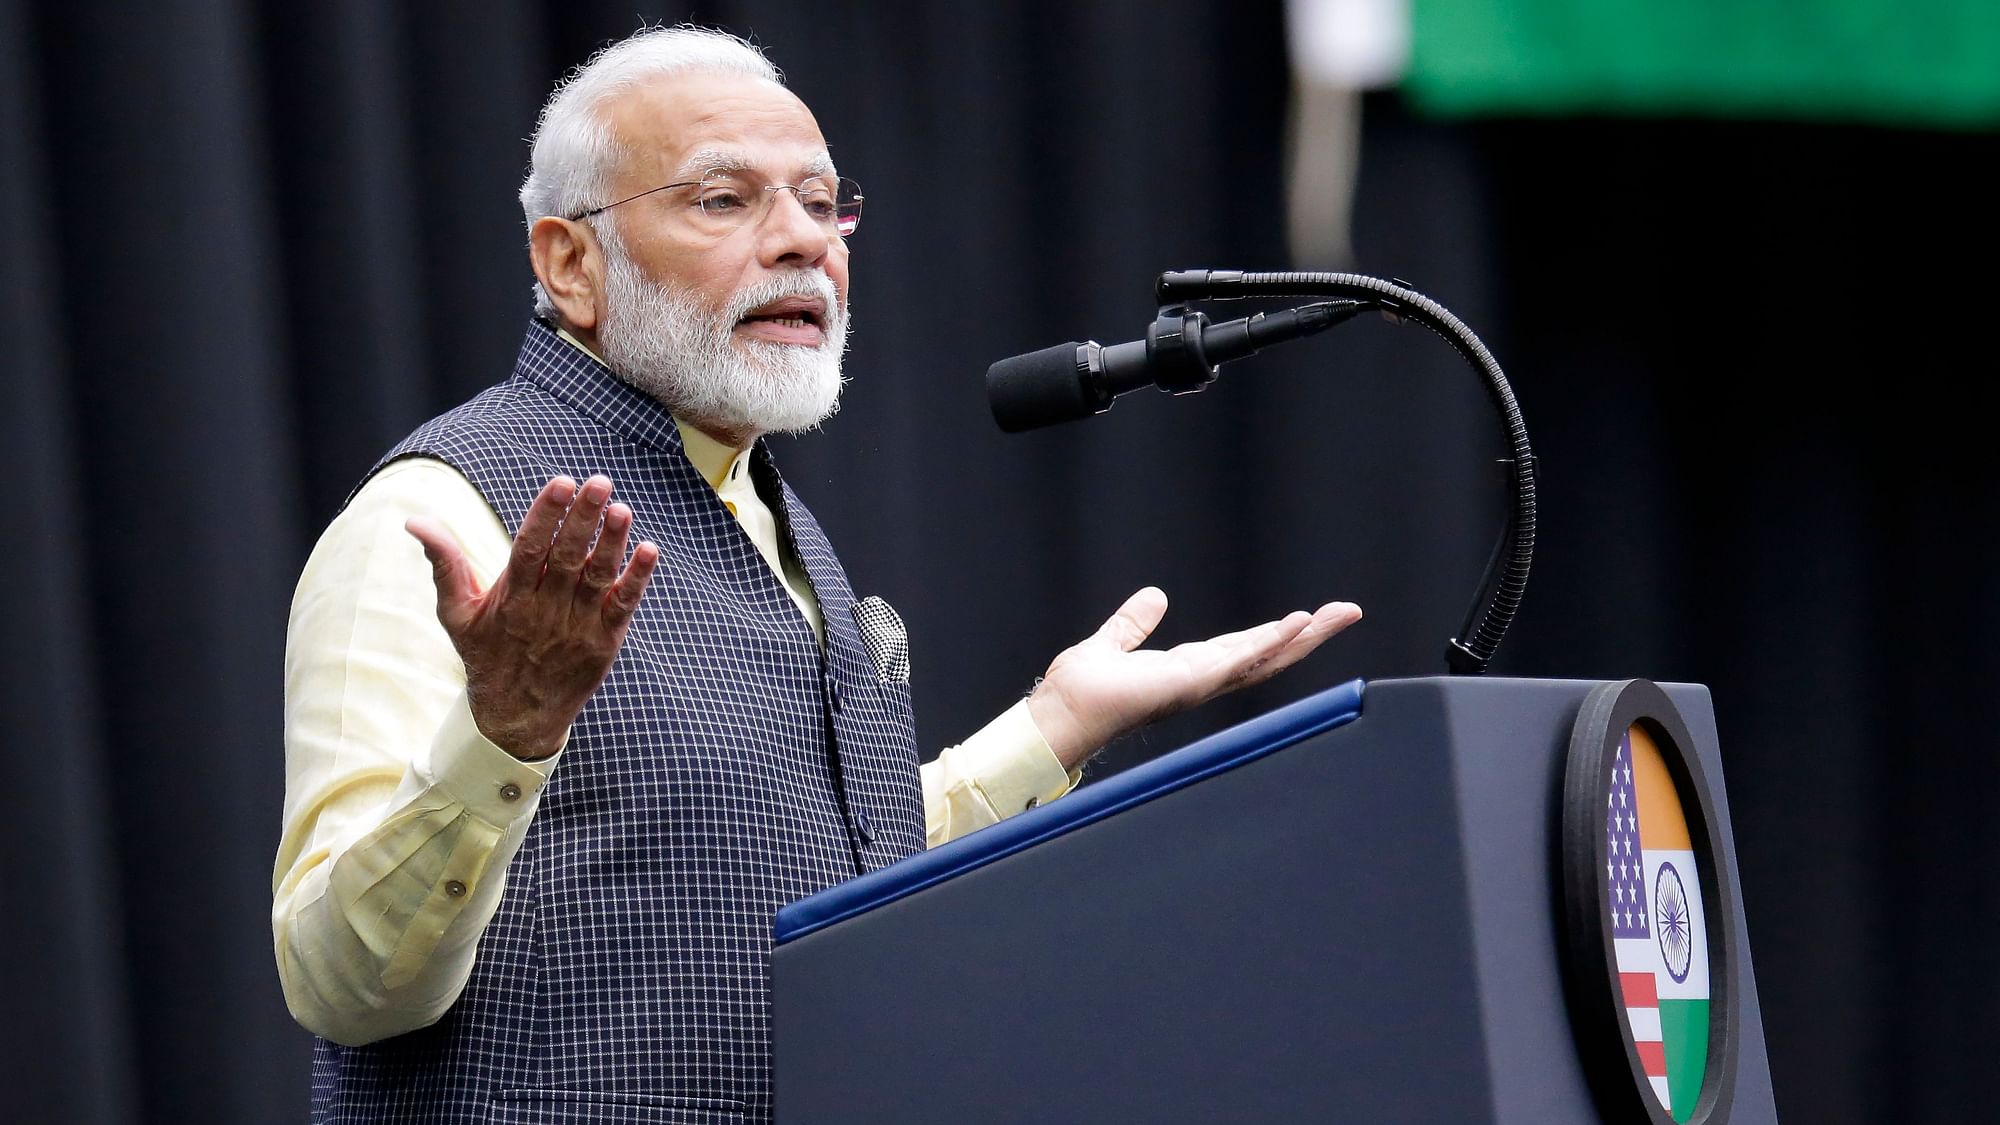 Prime Minister Modi hit out at Pakistan for its support to terrorism and said India’s decision to nullify Article 370 has caused trouble to those who cannot handle their country.